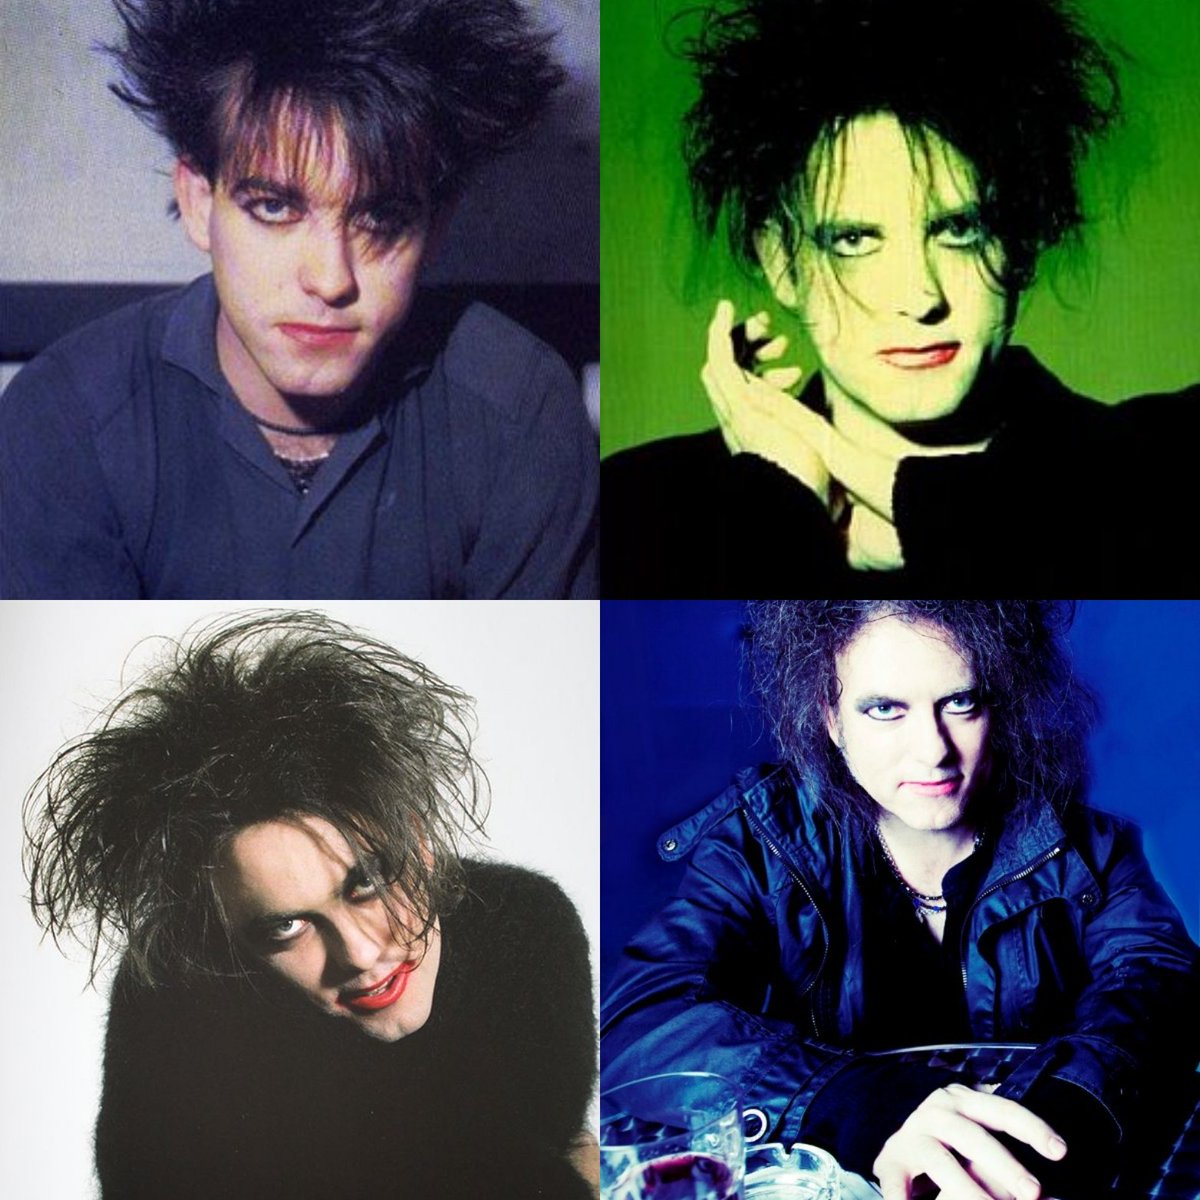 Happy birthday to the one & only #RobertSmith.... What are your favourite Cure tracks & collaborations?